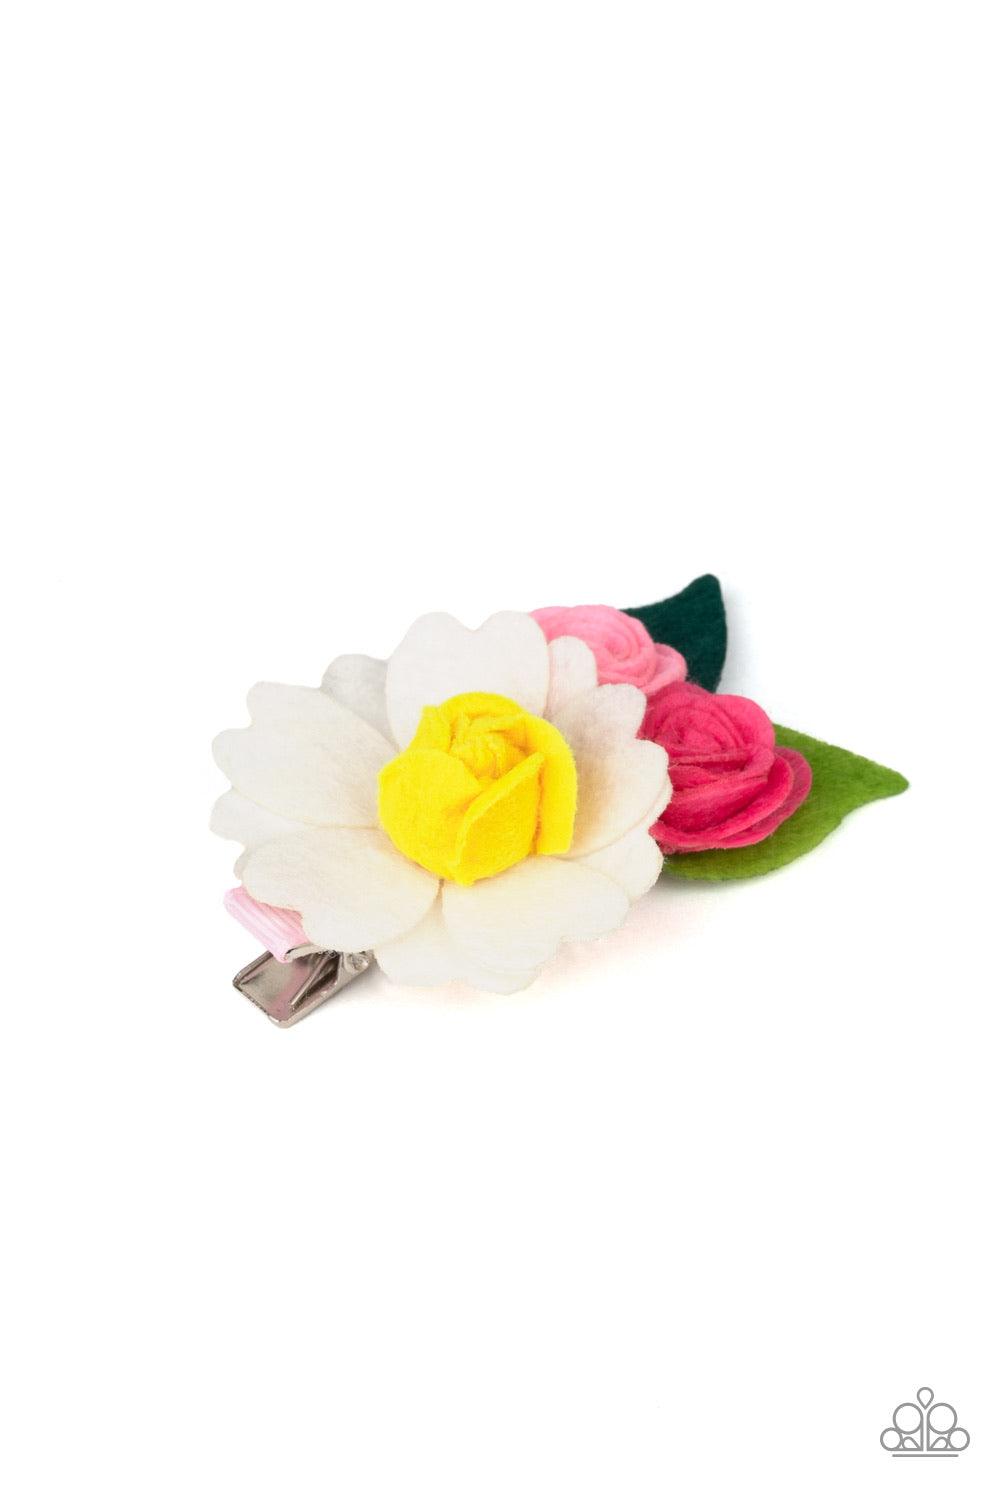 Paparazzi Accessories Flower Patch Posh - Multi Colorful felt flowers bloom atop a leafy backdrop for a whimsical look. Features a standard hair clip. Hair Accessories